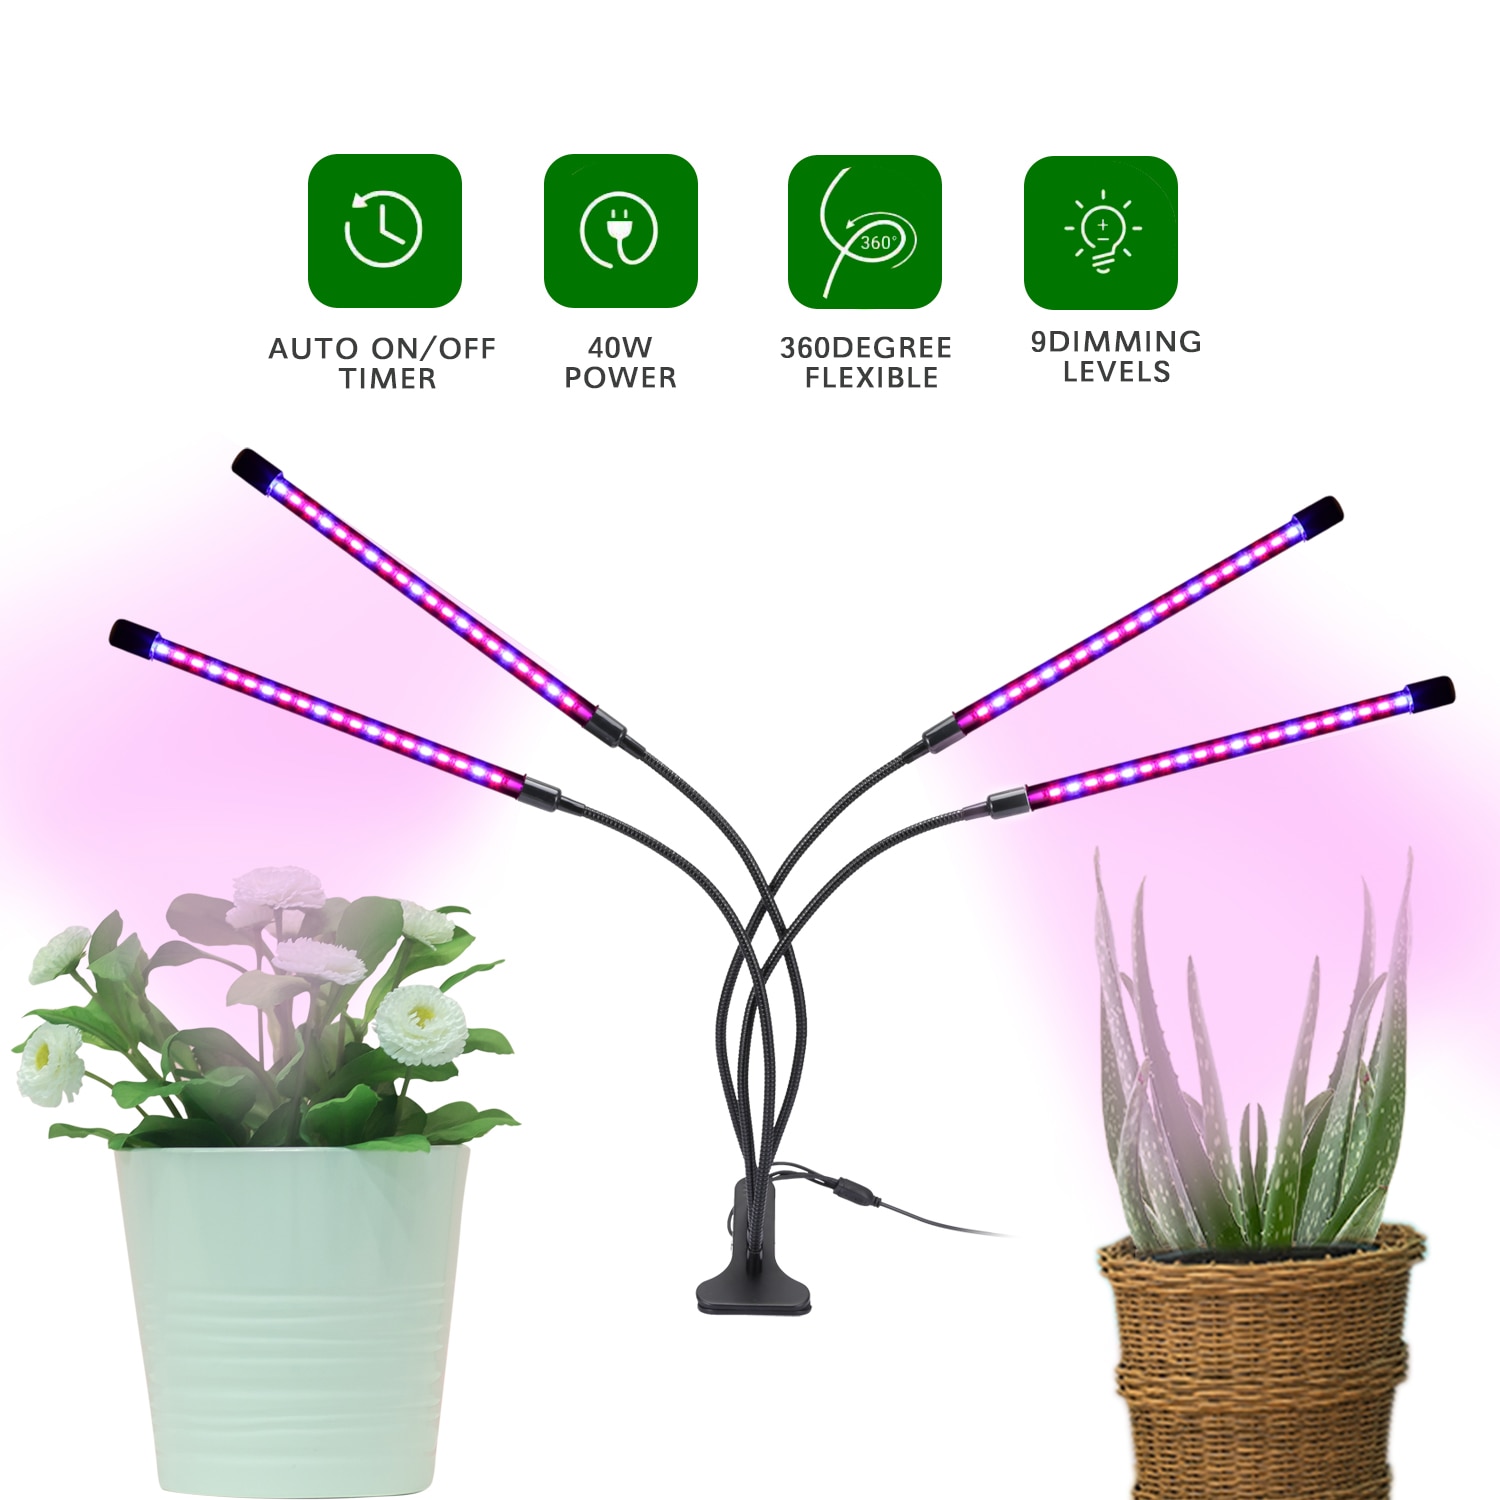 IngHoo Plant growth clip light Indoor LED Phyto Lamp Full Spectrum USB socket Wire control Cultivation Plants Seedlings Flower